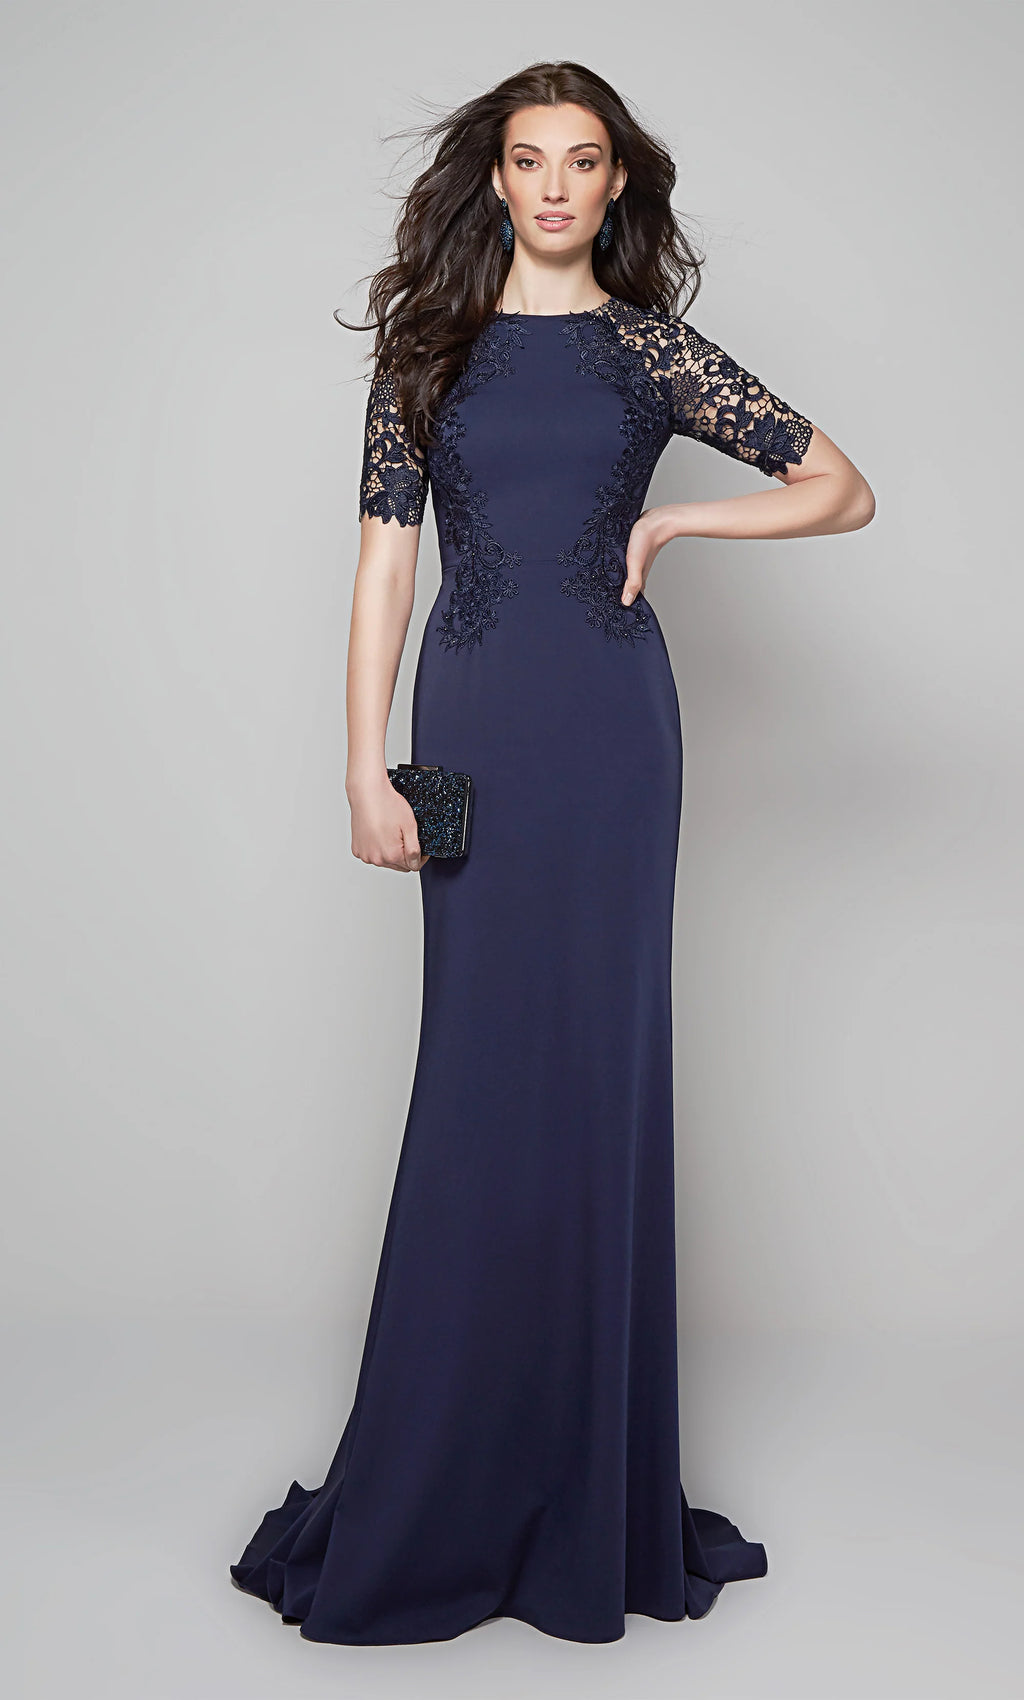 This Alyce Paris 27585  mother of the bride dress is styled in stretch crepe with lace accents, with a jewel neckline and short sleeves. This slim-flare formal gown exits with a partial illusion back and a sweep train